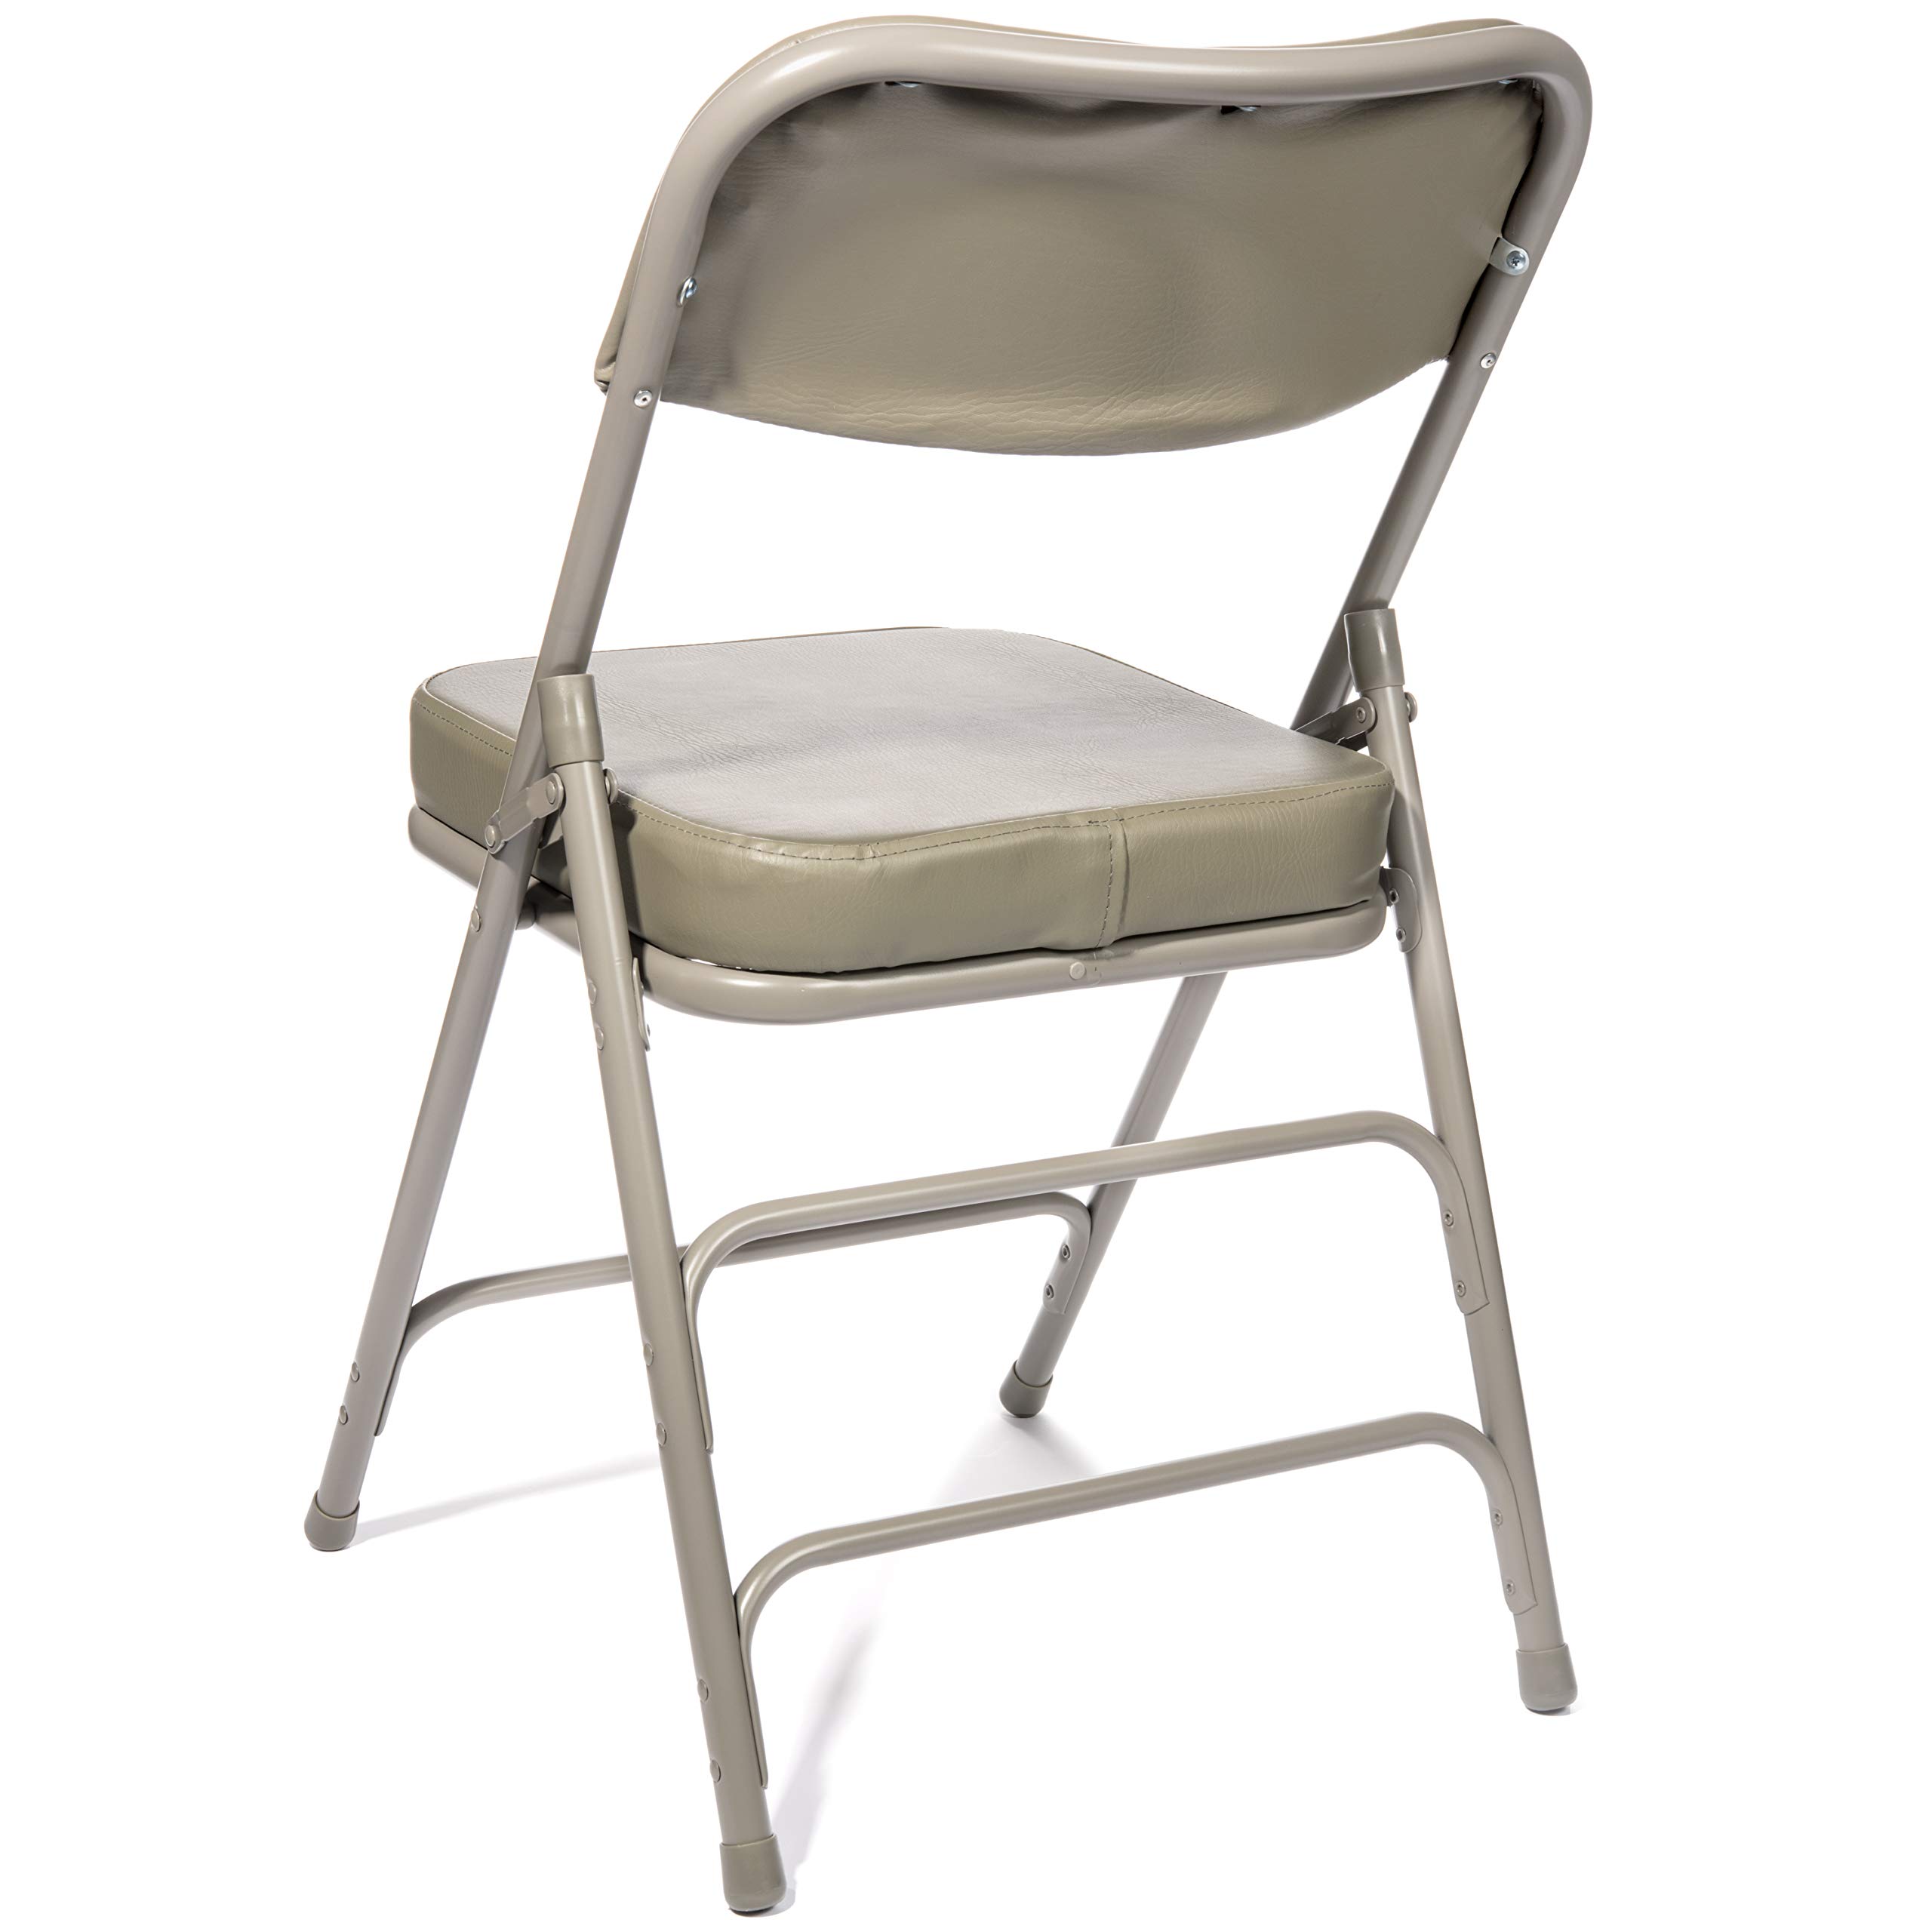 XL Series Vinyl Upholstered Folding Chair (2 Pack) - Heavy Duty Ultra Padded 2" Thick Padded Seat and Back, Triple Braced - Quad Hinging, 300 lb Tested (Grey)